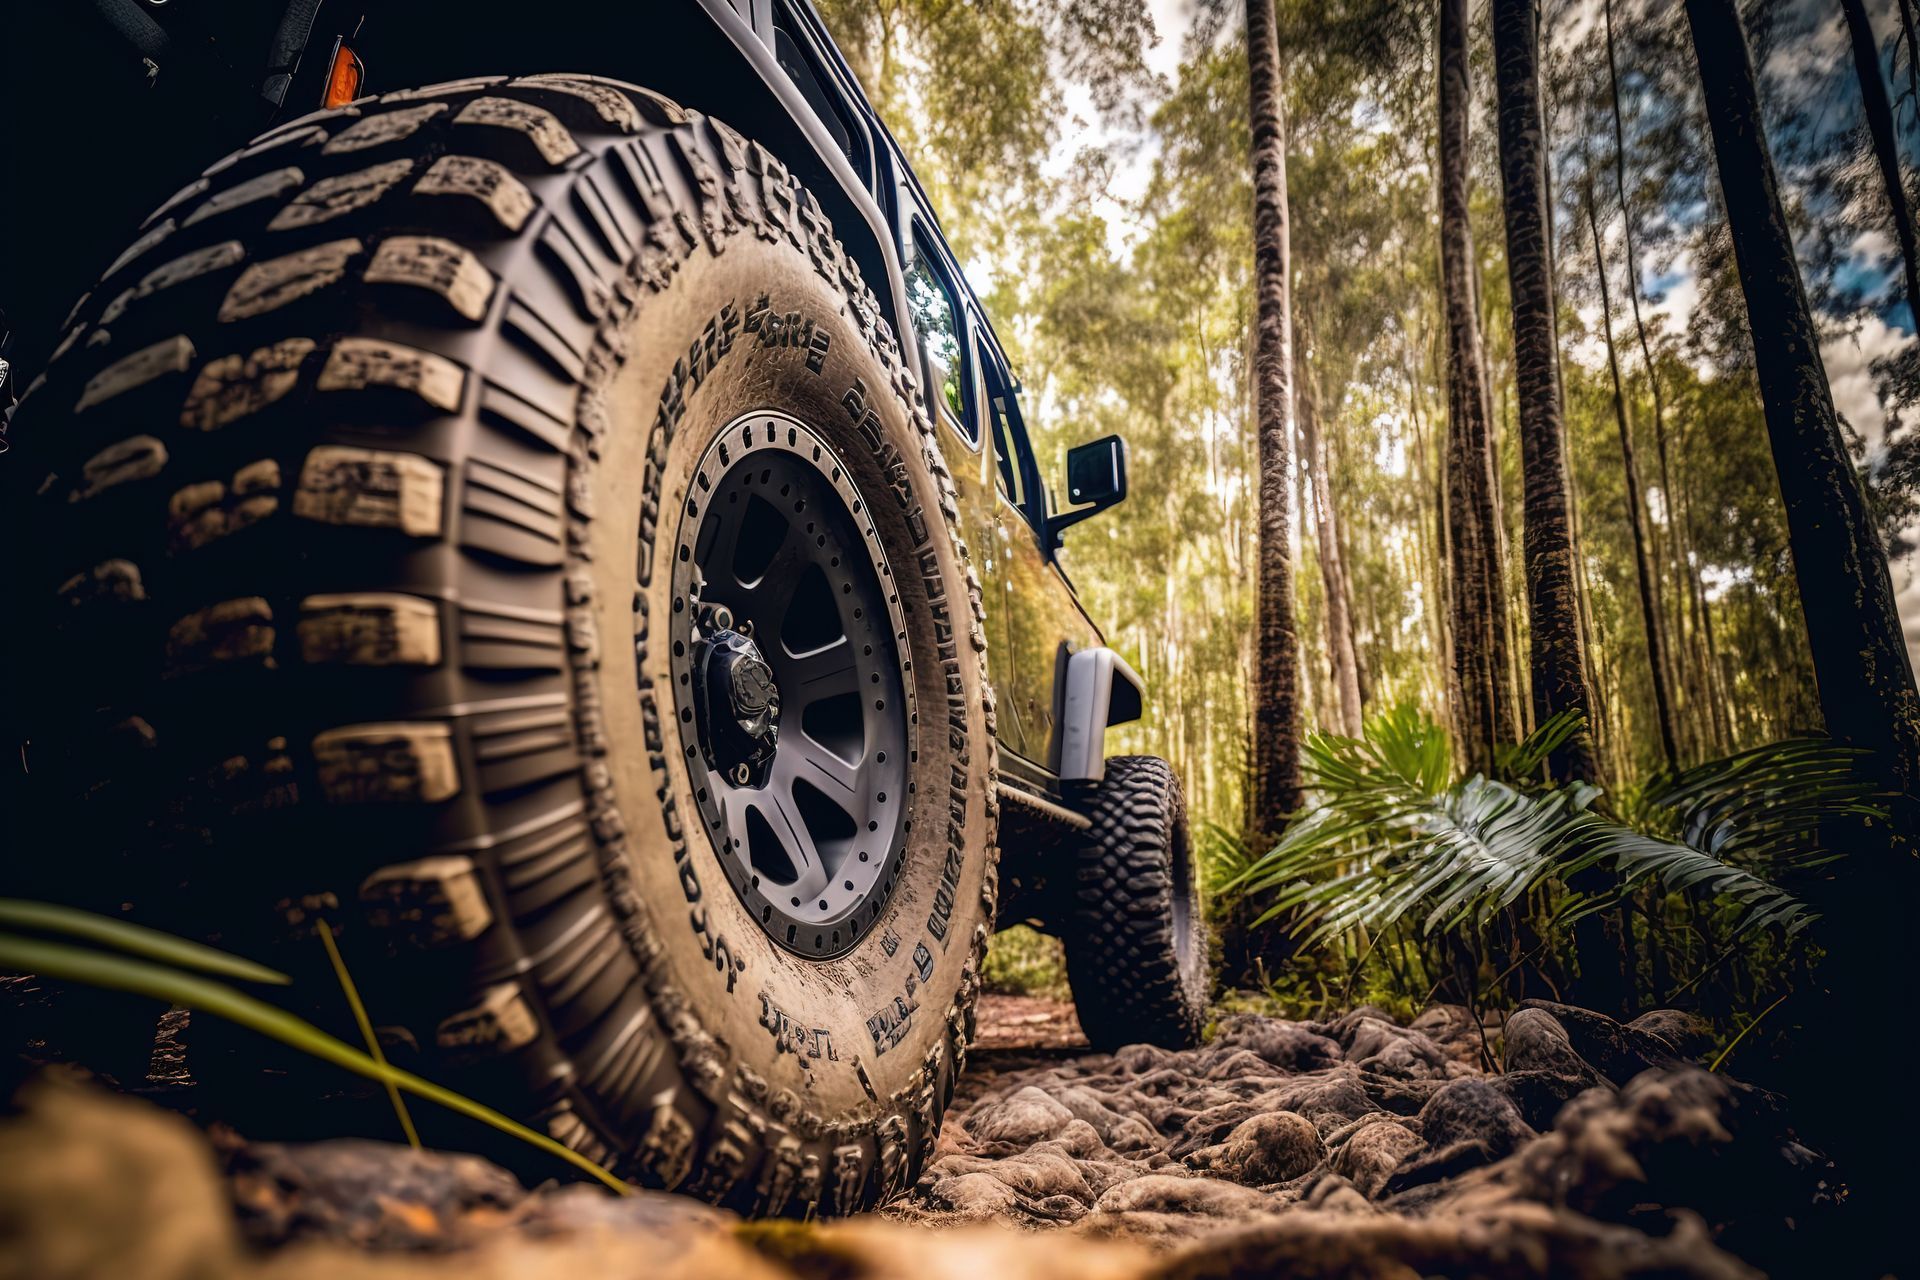 Do 4x4 Vehicles Need Specific Maintenance and Care? | The Garage Automotive Solutions 